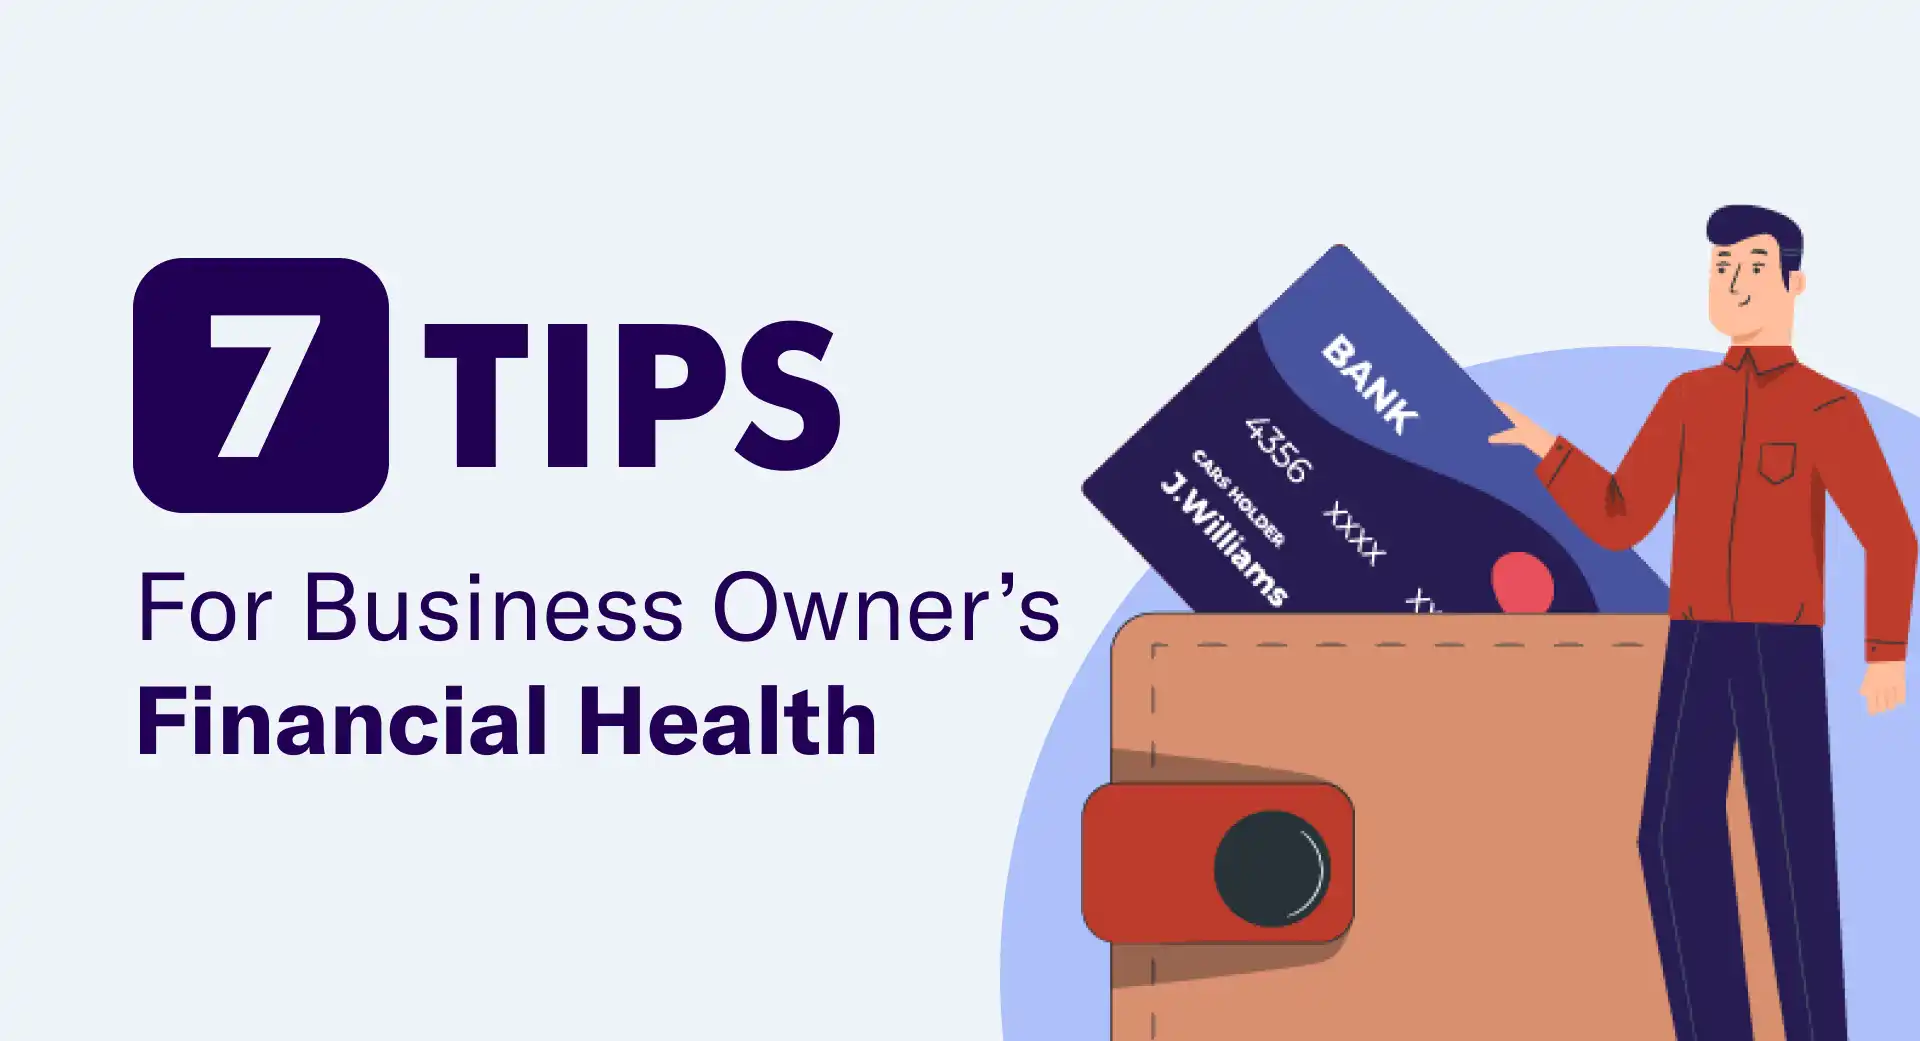 7 Tips for Business Owners’ Financial Health